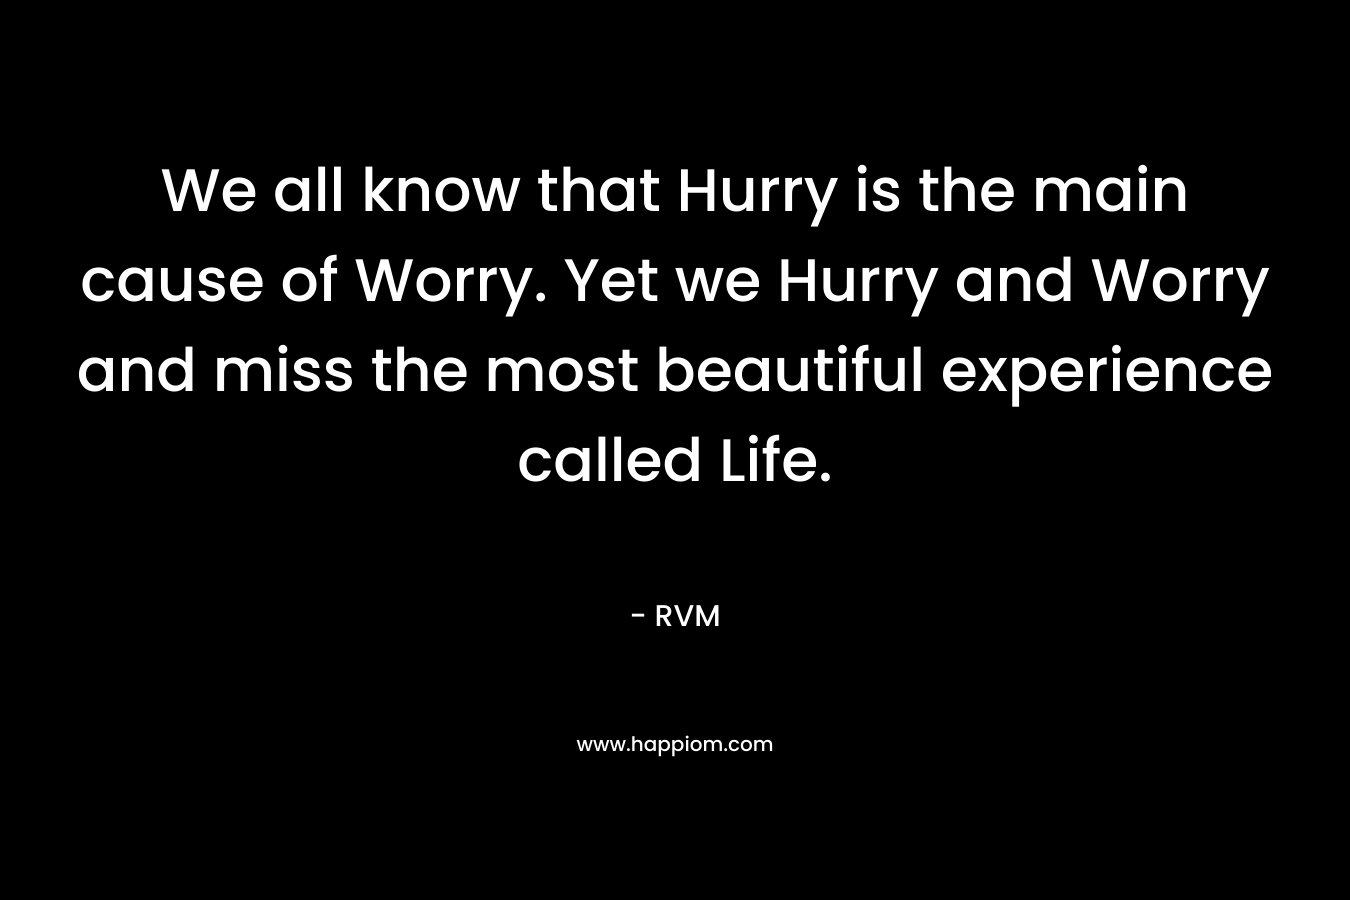 We all know that Hurry is the main cause of Worry. Yet we Hurry and Worry and miss the most beautiful experience called Life.